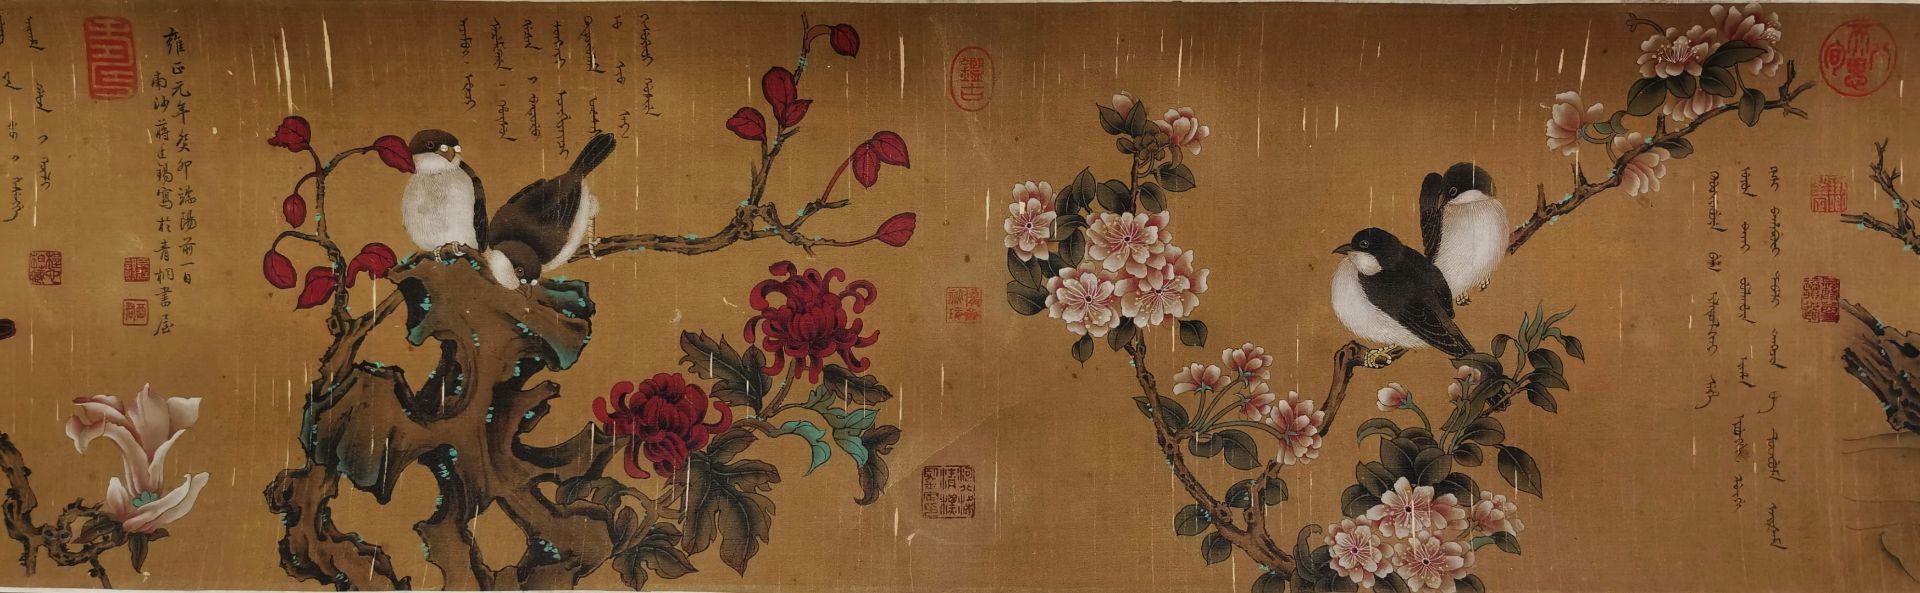 A Chinese Hand Scroll Painting By Jiang Tingxi - Image 6 of 13